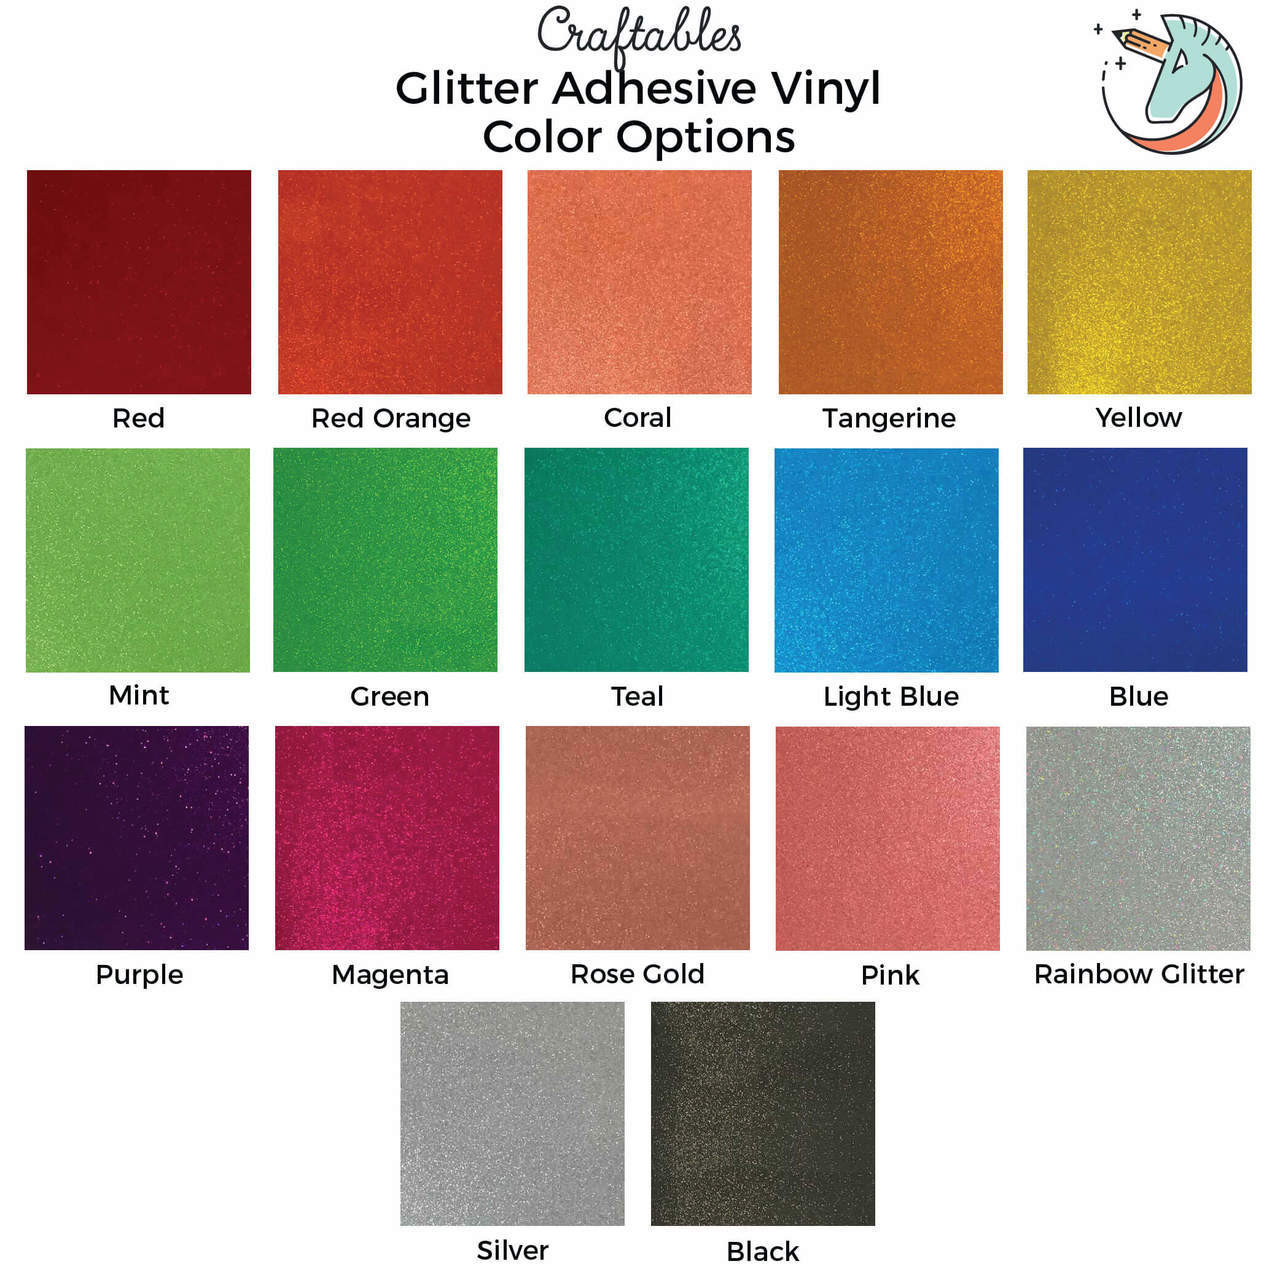 Gold Glitter Adhesive Vinyl Sheets By Craftables